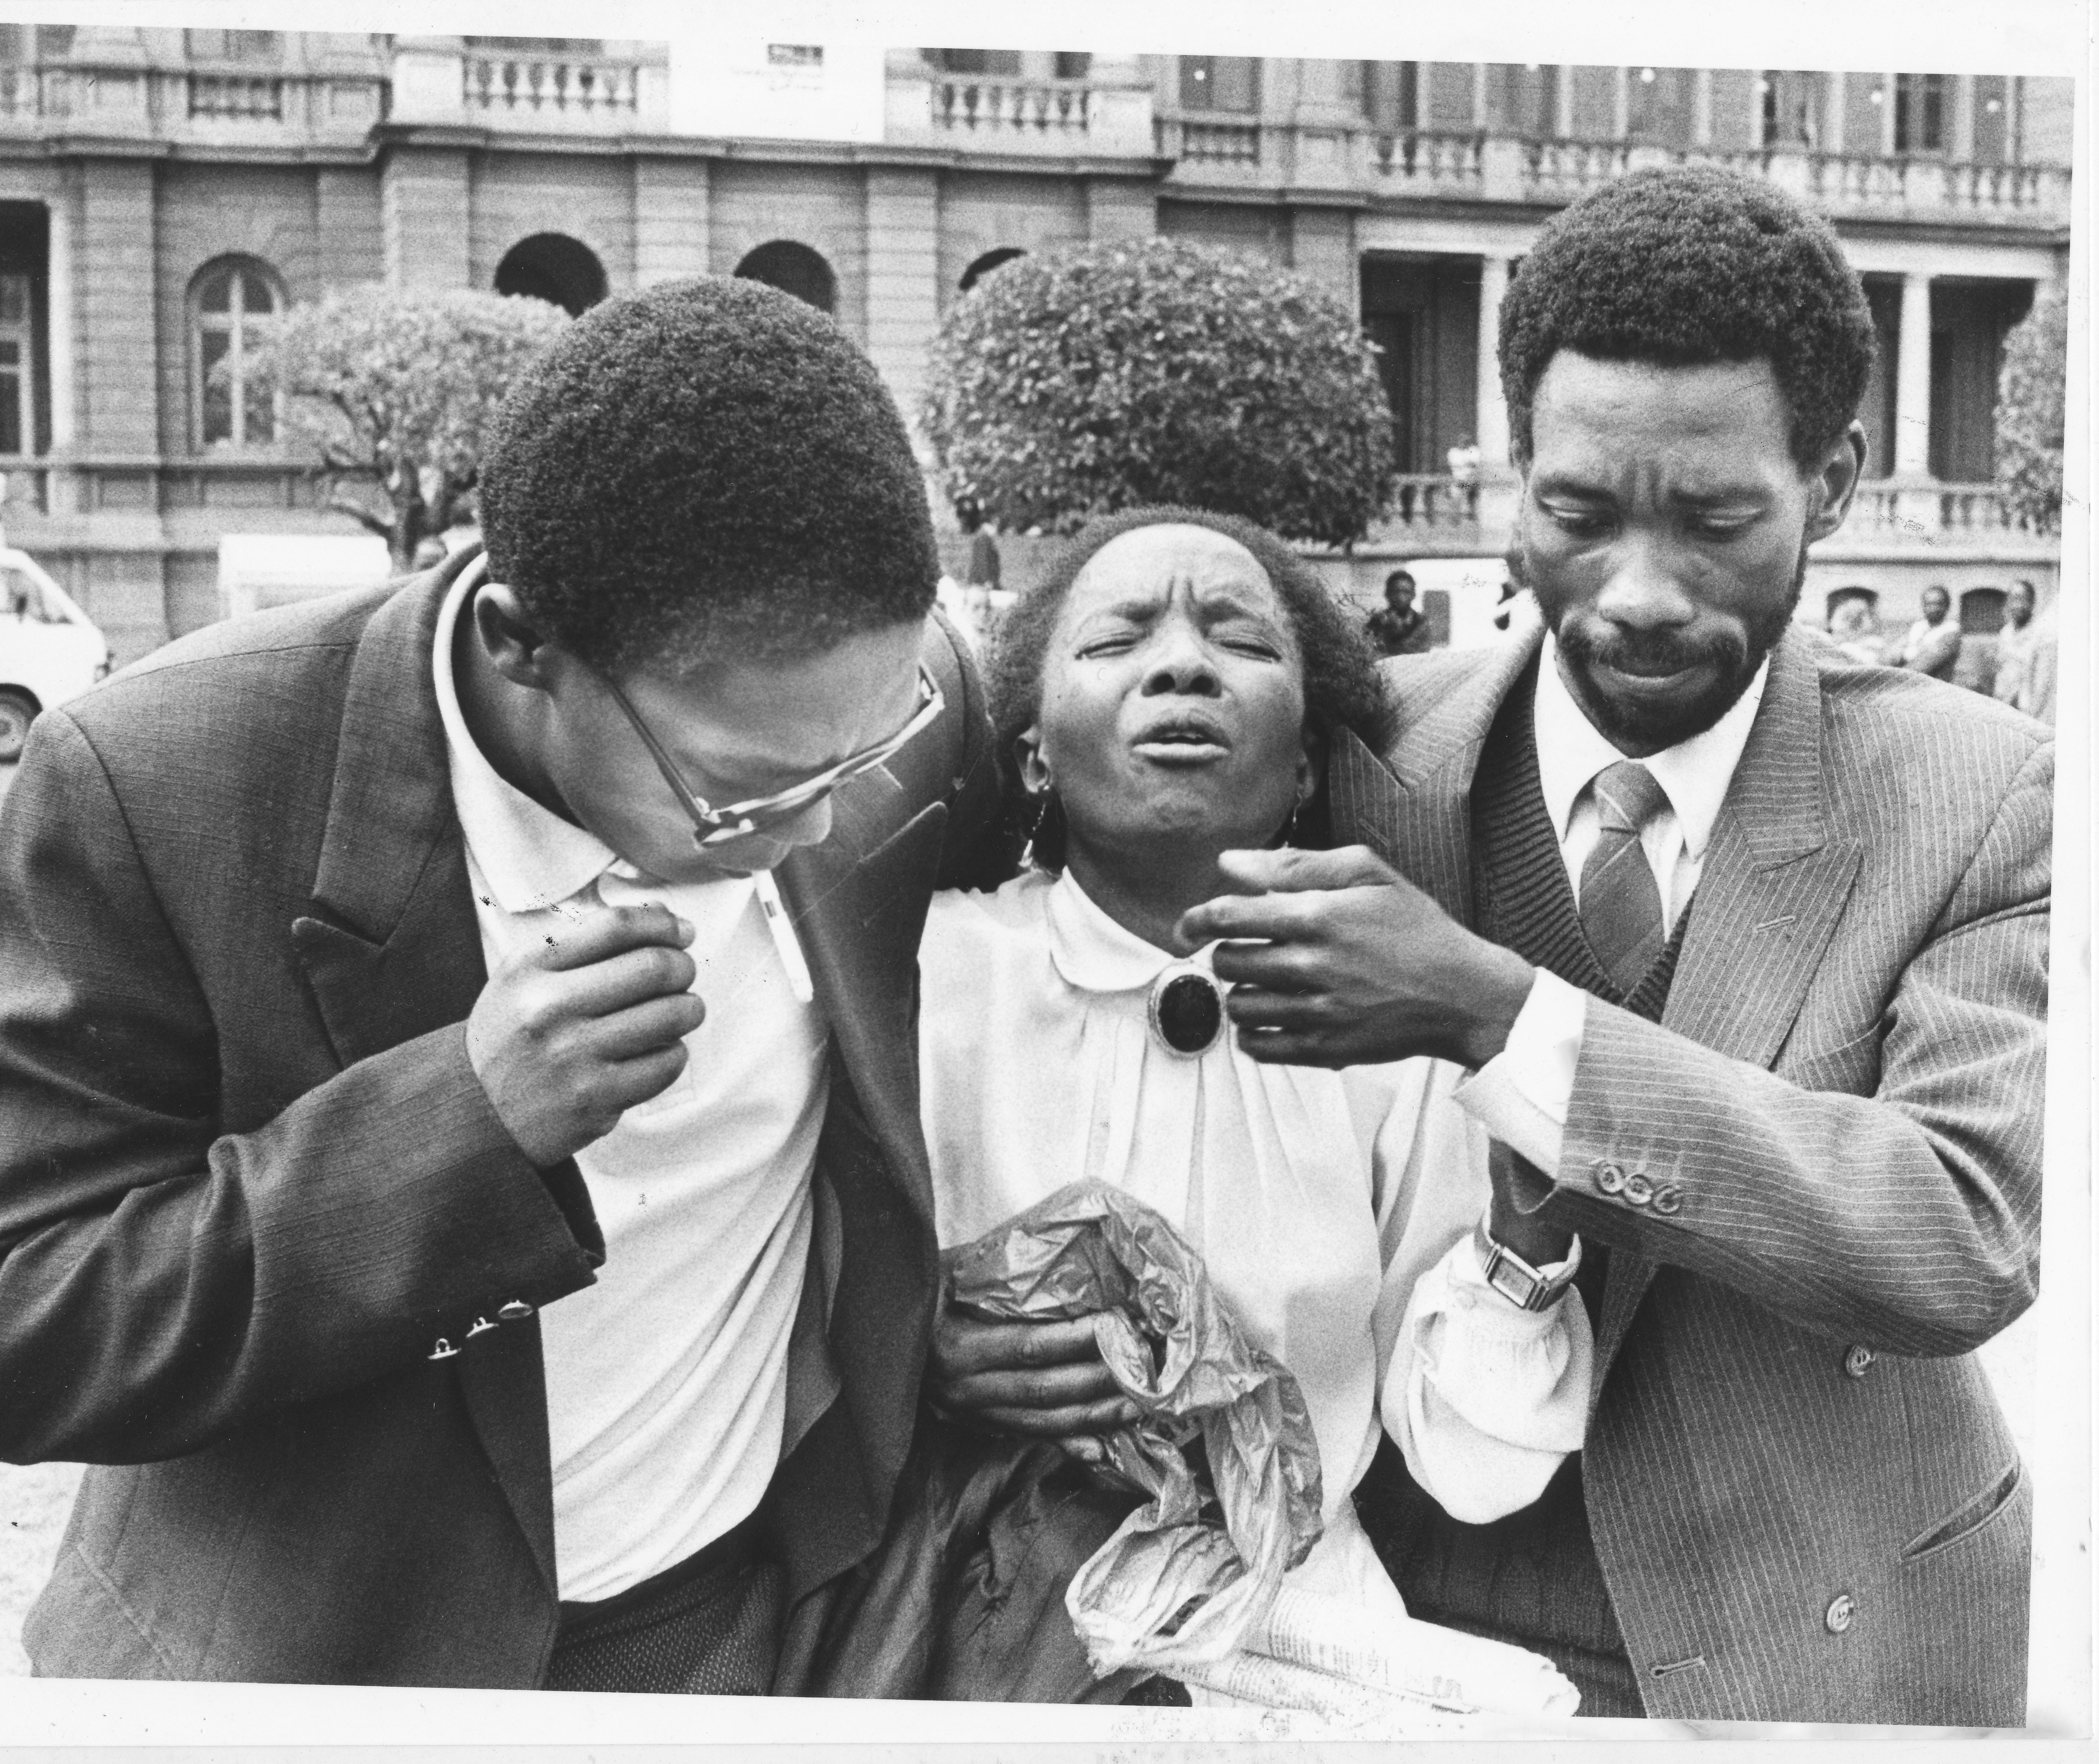 PRETORIA, SOUTH AFRICA - NOVEMBER 19: Mr Simon Nkoli (right) , one of the accused who was acquitted of all the charges comforts Miss Maticho Mokoena sister of John Sekwati Mokoena who was found guilty of terrorism at the Delmas Trial on November 19, 1988 in Pretoria, South Africa. (Photo by Gallo Images/Drum/E Mboweni)